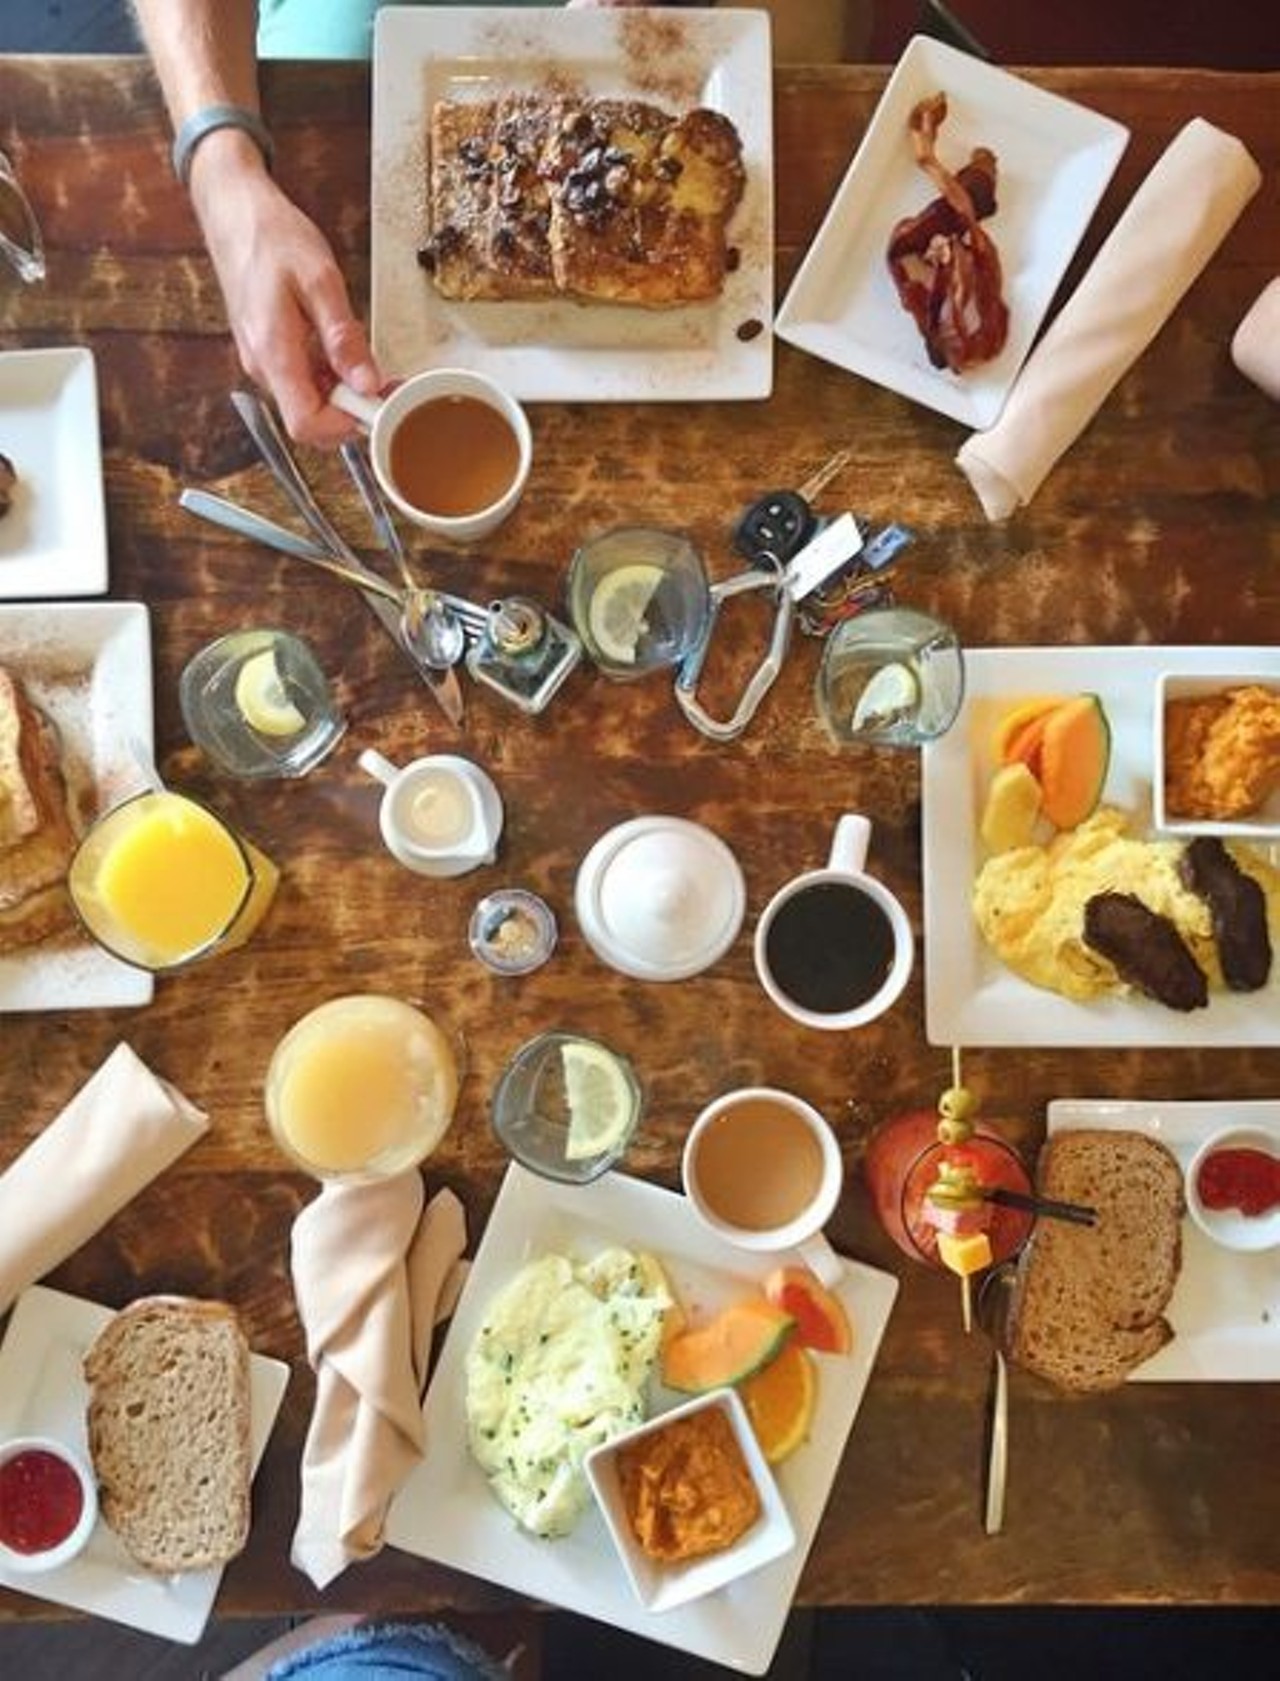 Where you can brunch like royalty: Cafe Muse; 418 S. Washington Ave., Royal Oak; 248-544-4749:  Sometimes a place can be a brunch destination without ever seeming to use the "B" word. The menu is breakfast and lunch, and prevails from 7:30 a.m. to 3 p.m., offering such brunch direct hits as stuffed French toast, vanilla bean waffles, steak and eggs, and mushroom scramble with Boursin and truffle oil. Add specials that change weekly and the potations mixed up at the full bar, and you have the makings of a brunch of champions.